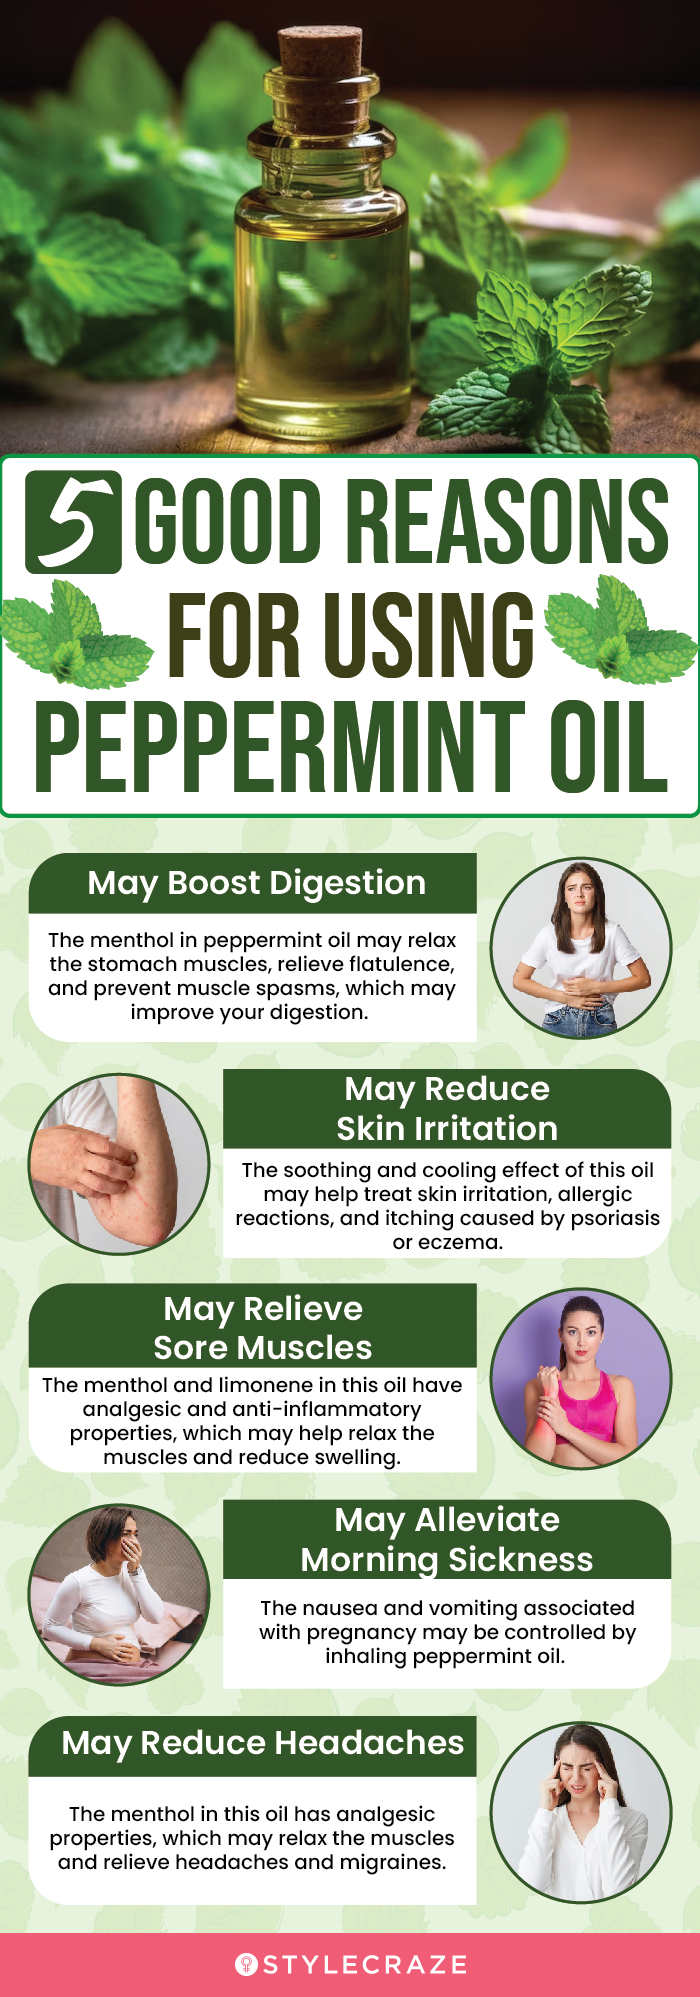 5 good reasons for using peppermint oil (infographic)